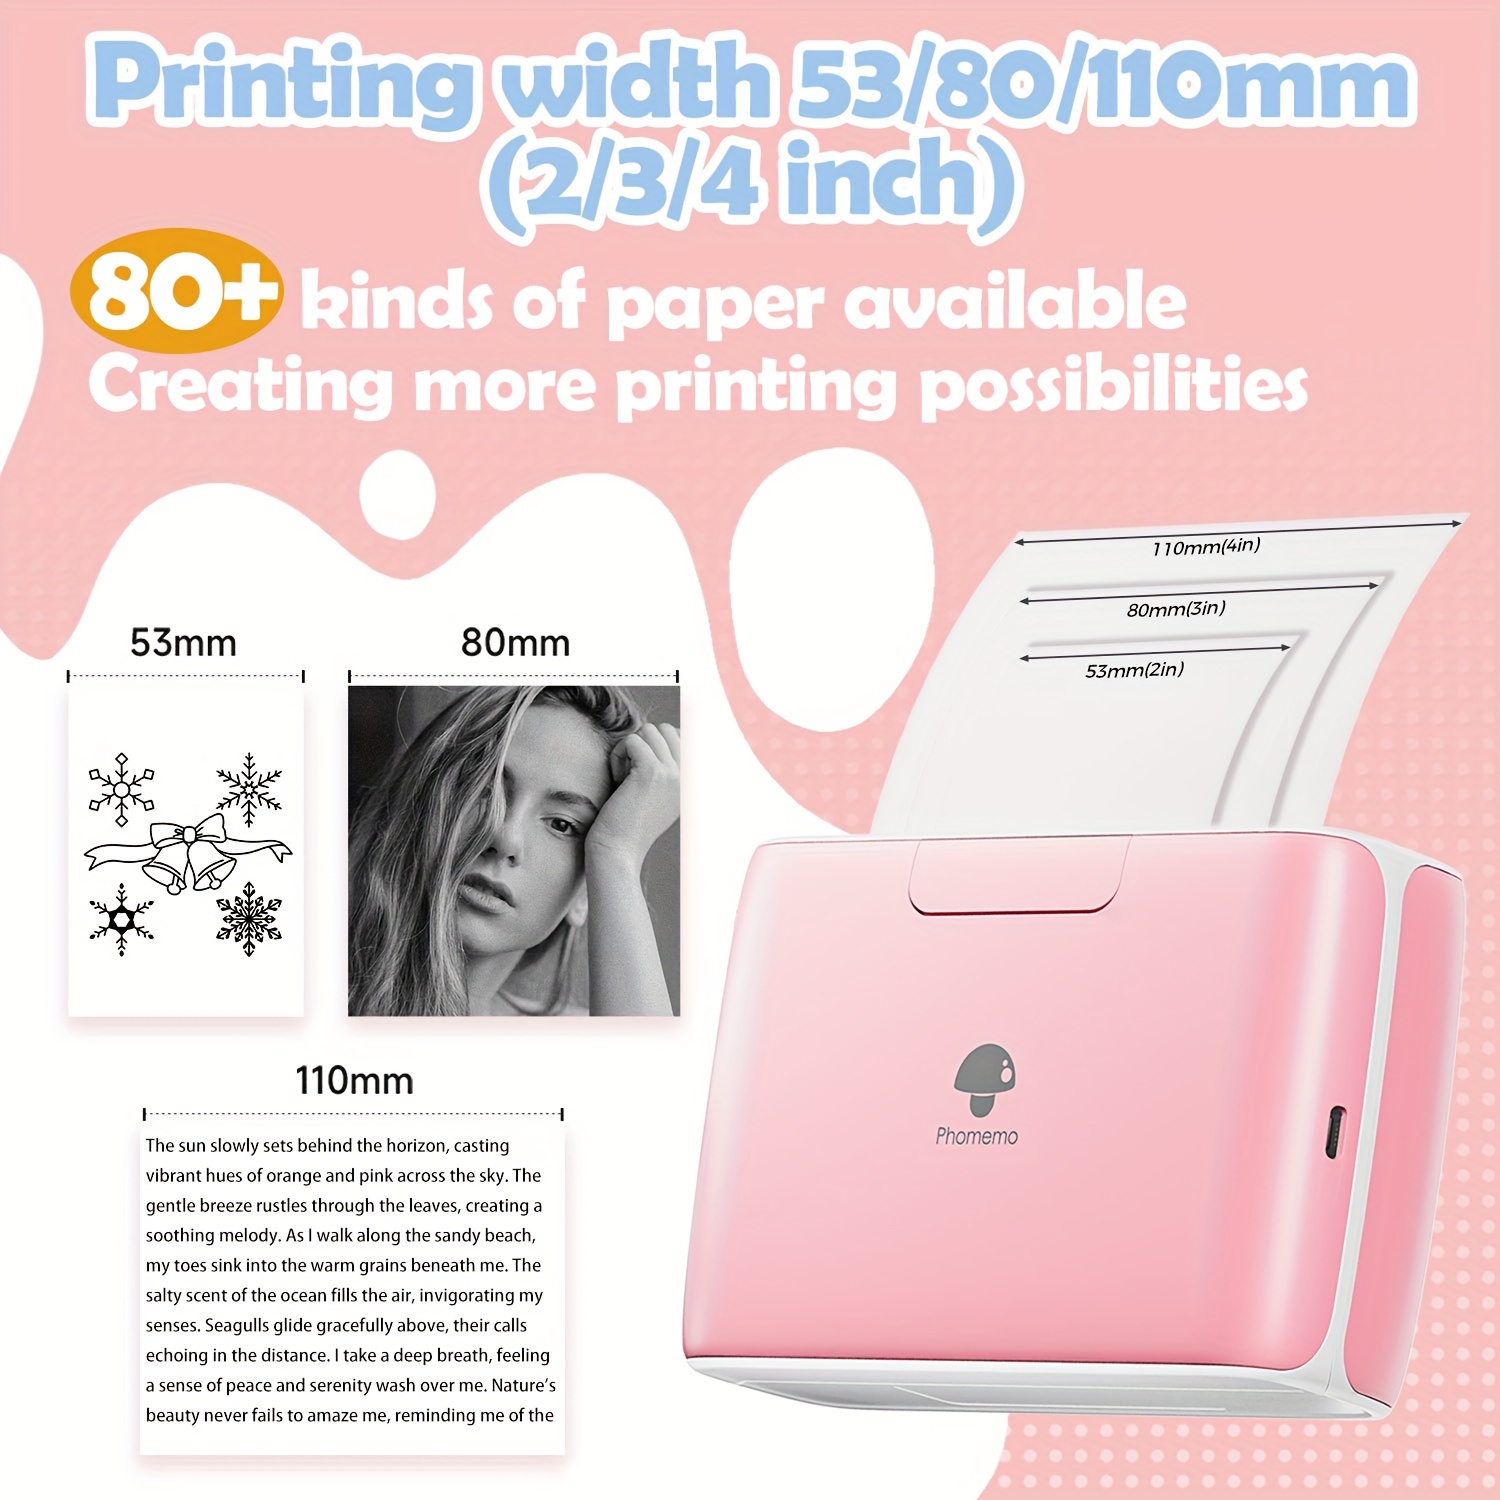 Phomemo M04S Bluetooth Portable Printer-Thermal Label Printer Notes  Printer, Support 2/3/4 inch Printing Width, 300dpi, Great for Document,  Notes